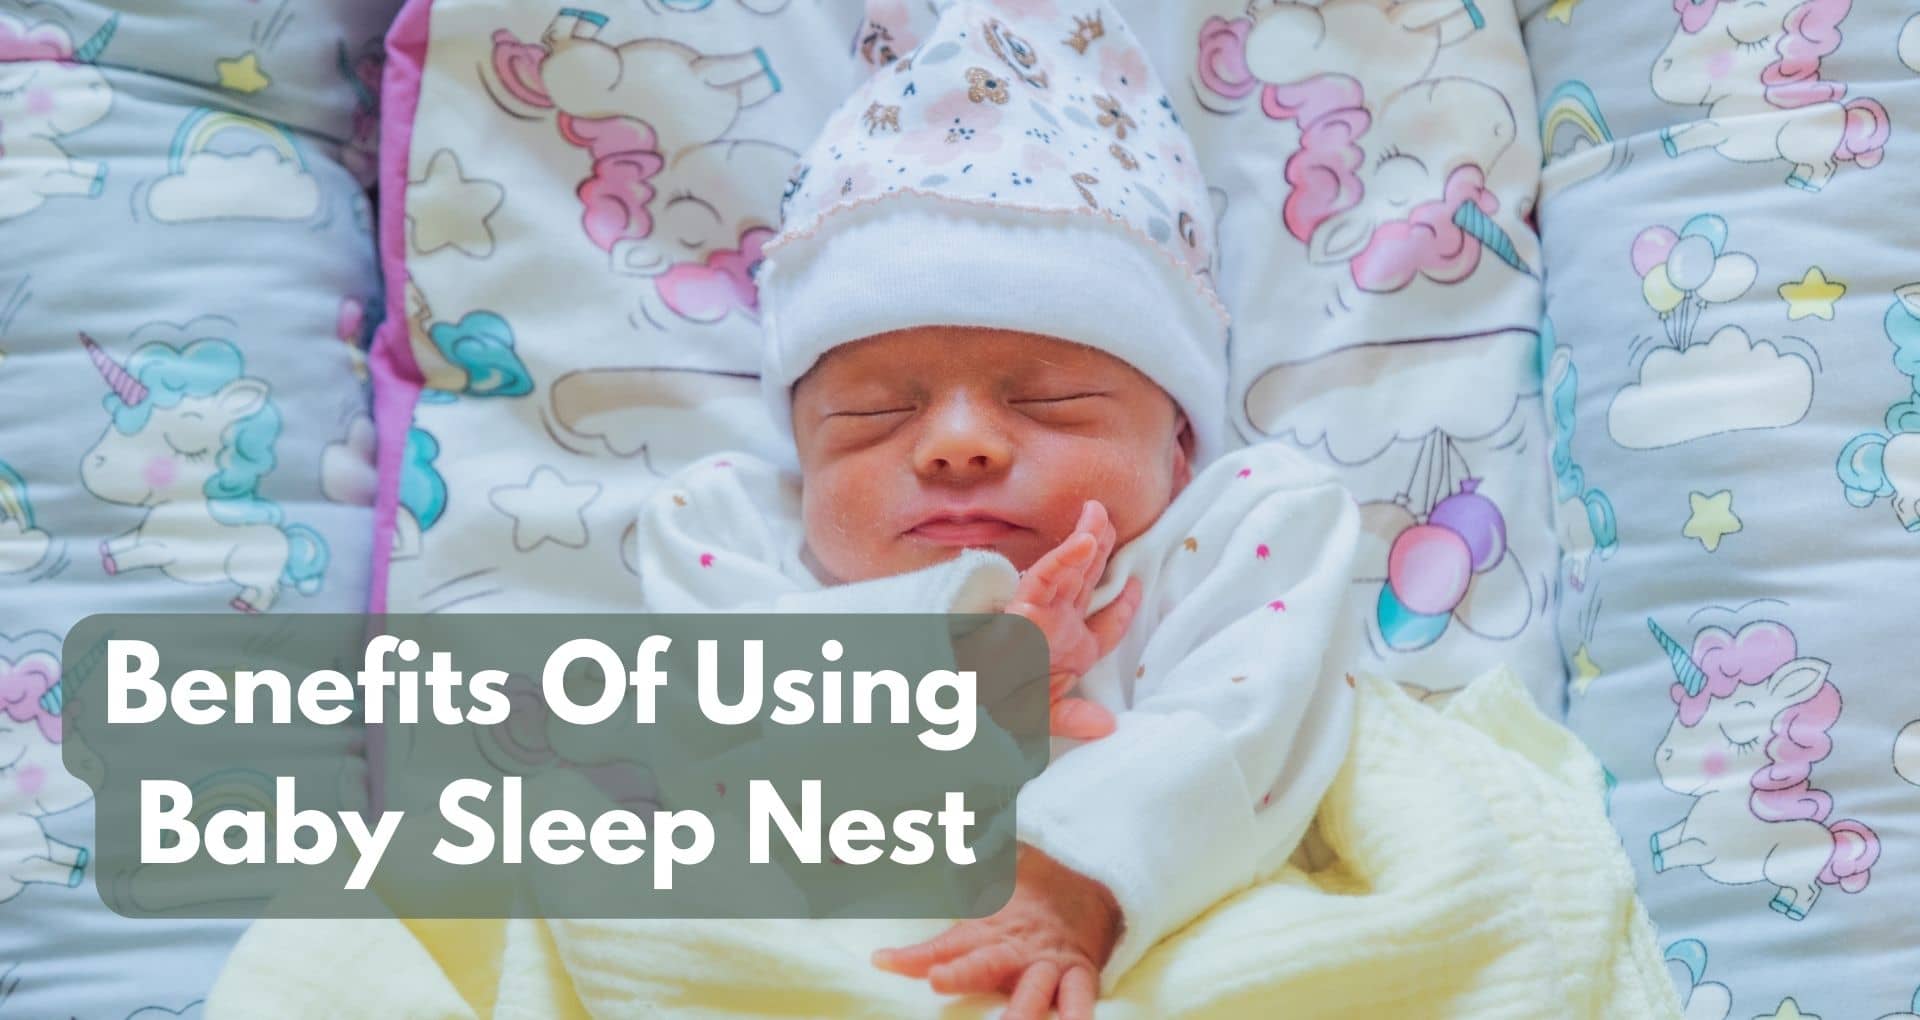 What Are The Benefits Of Using Baby Sleep Nest